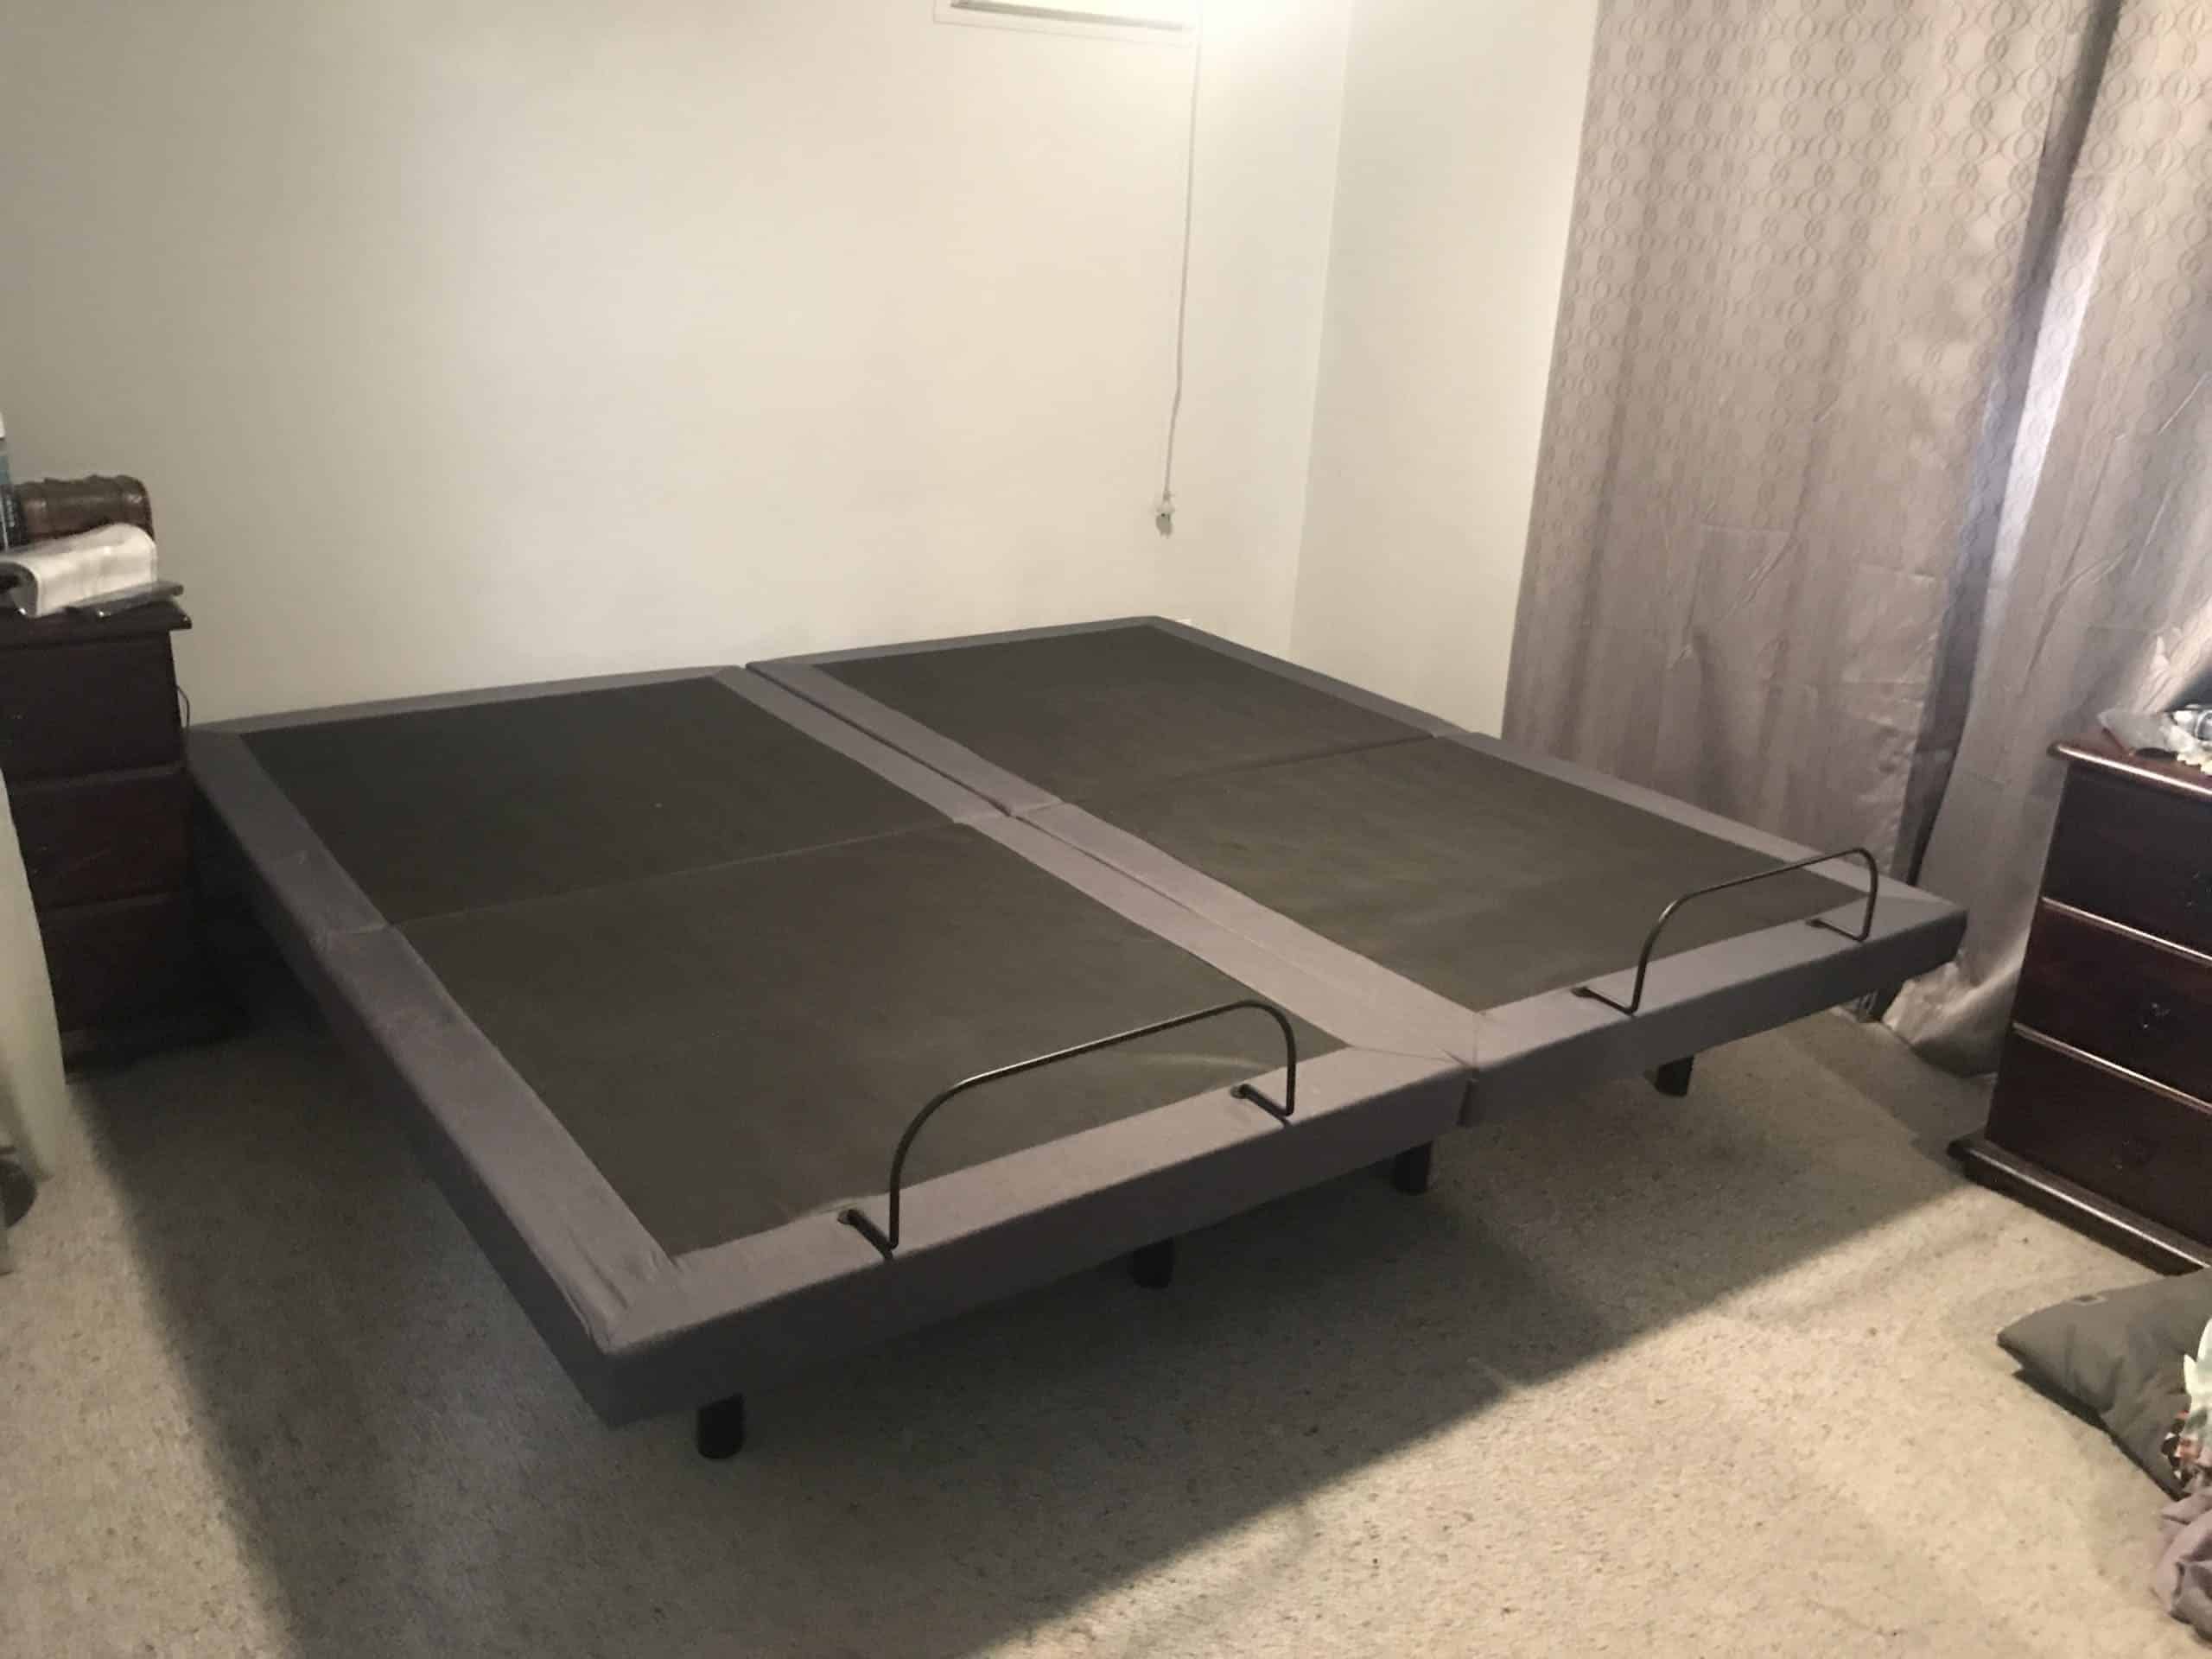 Solace Sleep adjustable bed customer in home set up base